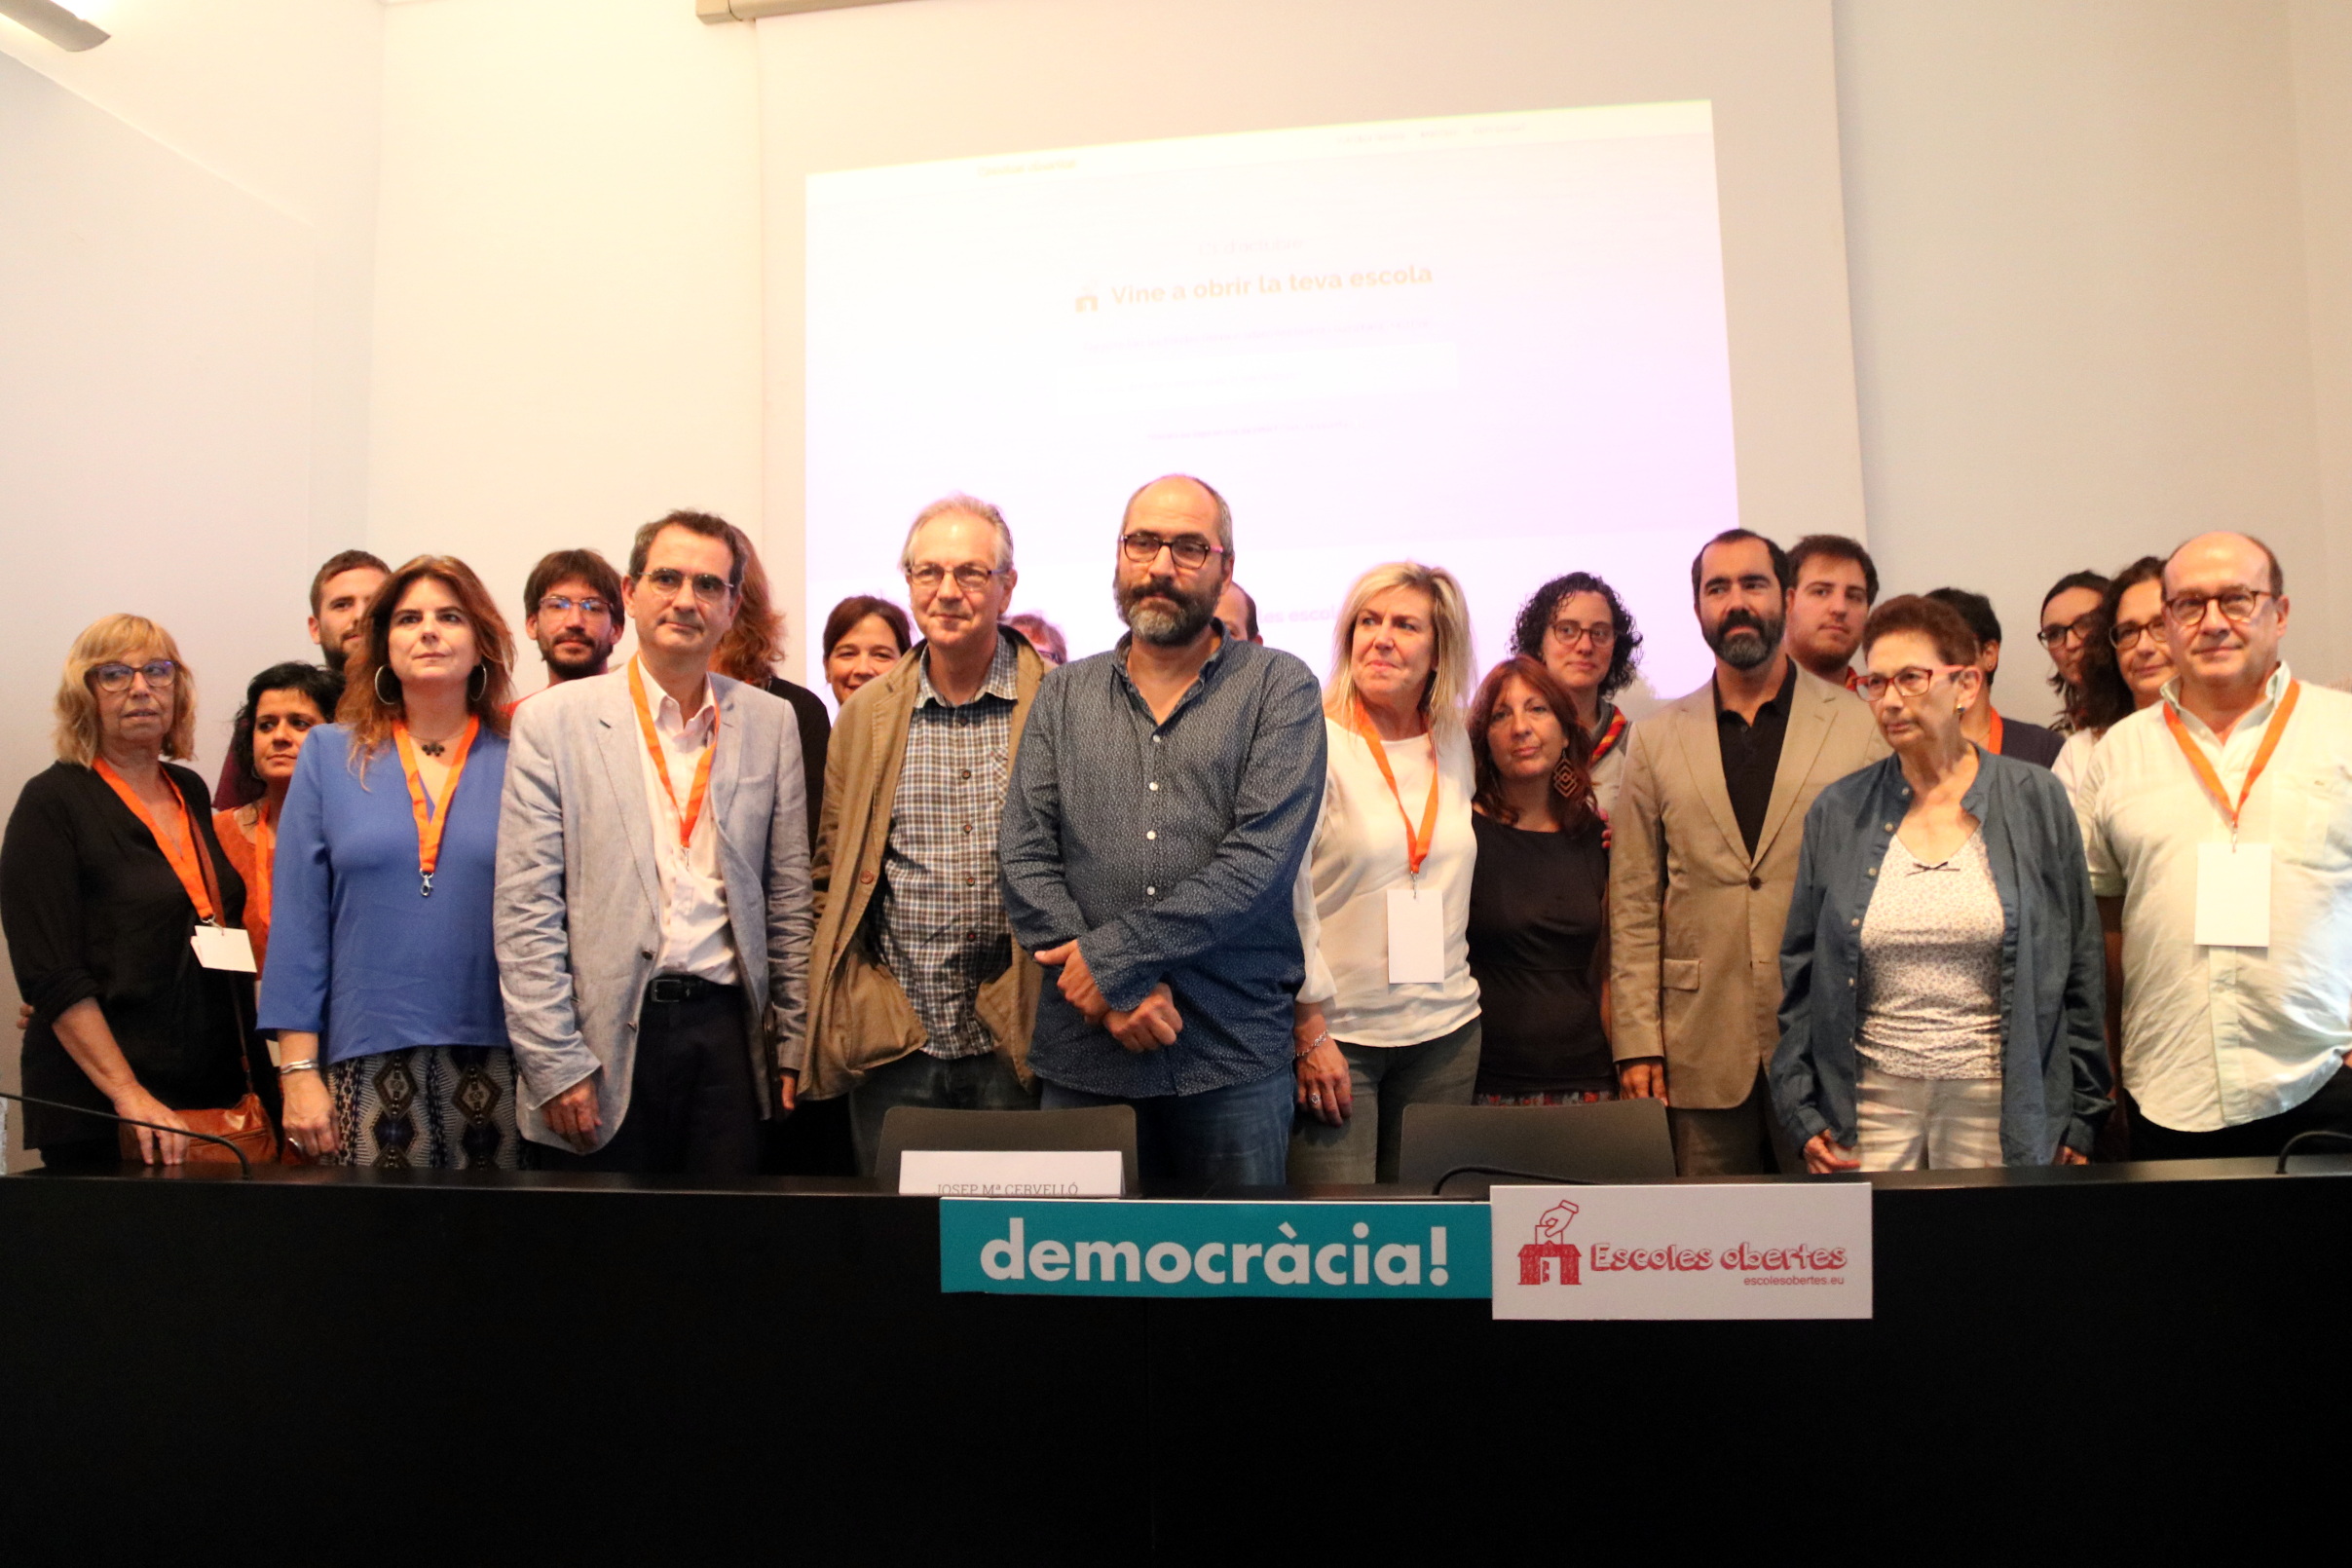 Group photo of the organizers of the Open Schools project to guarantee the polls remain open for the October 1 referendum vote